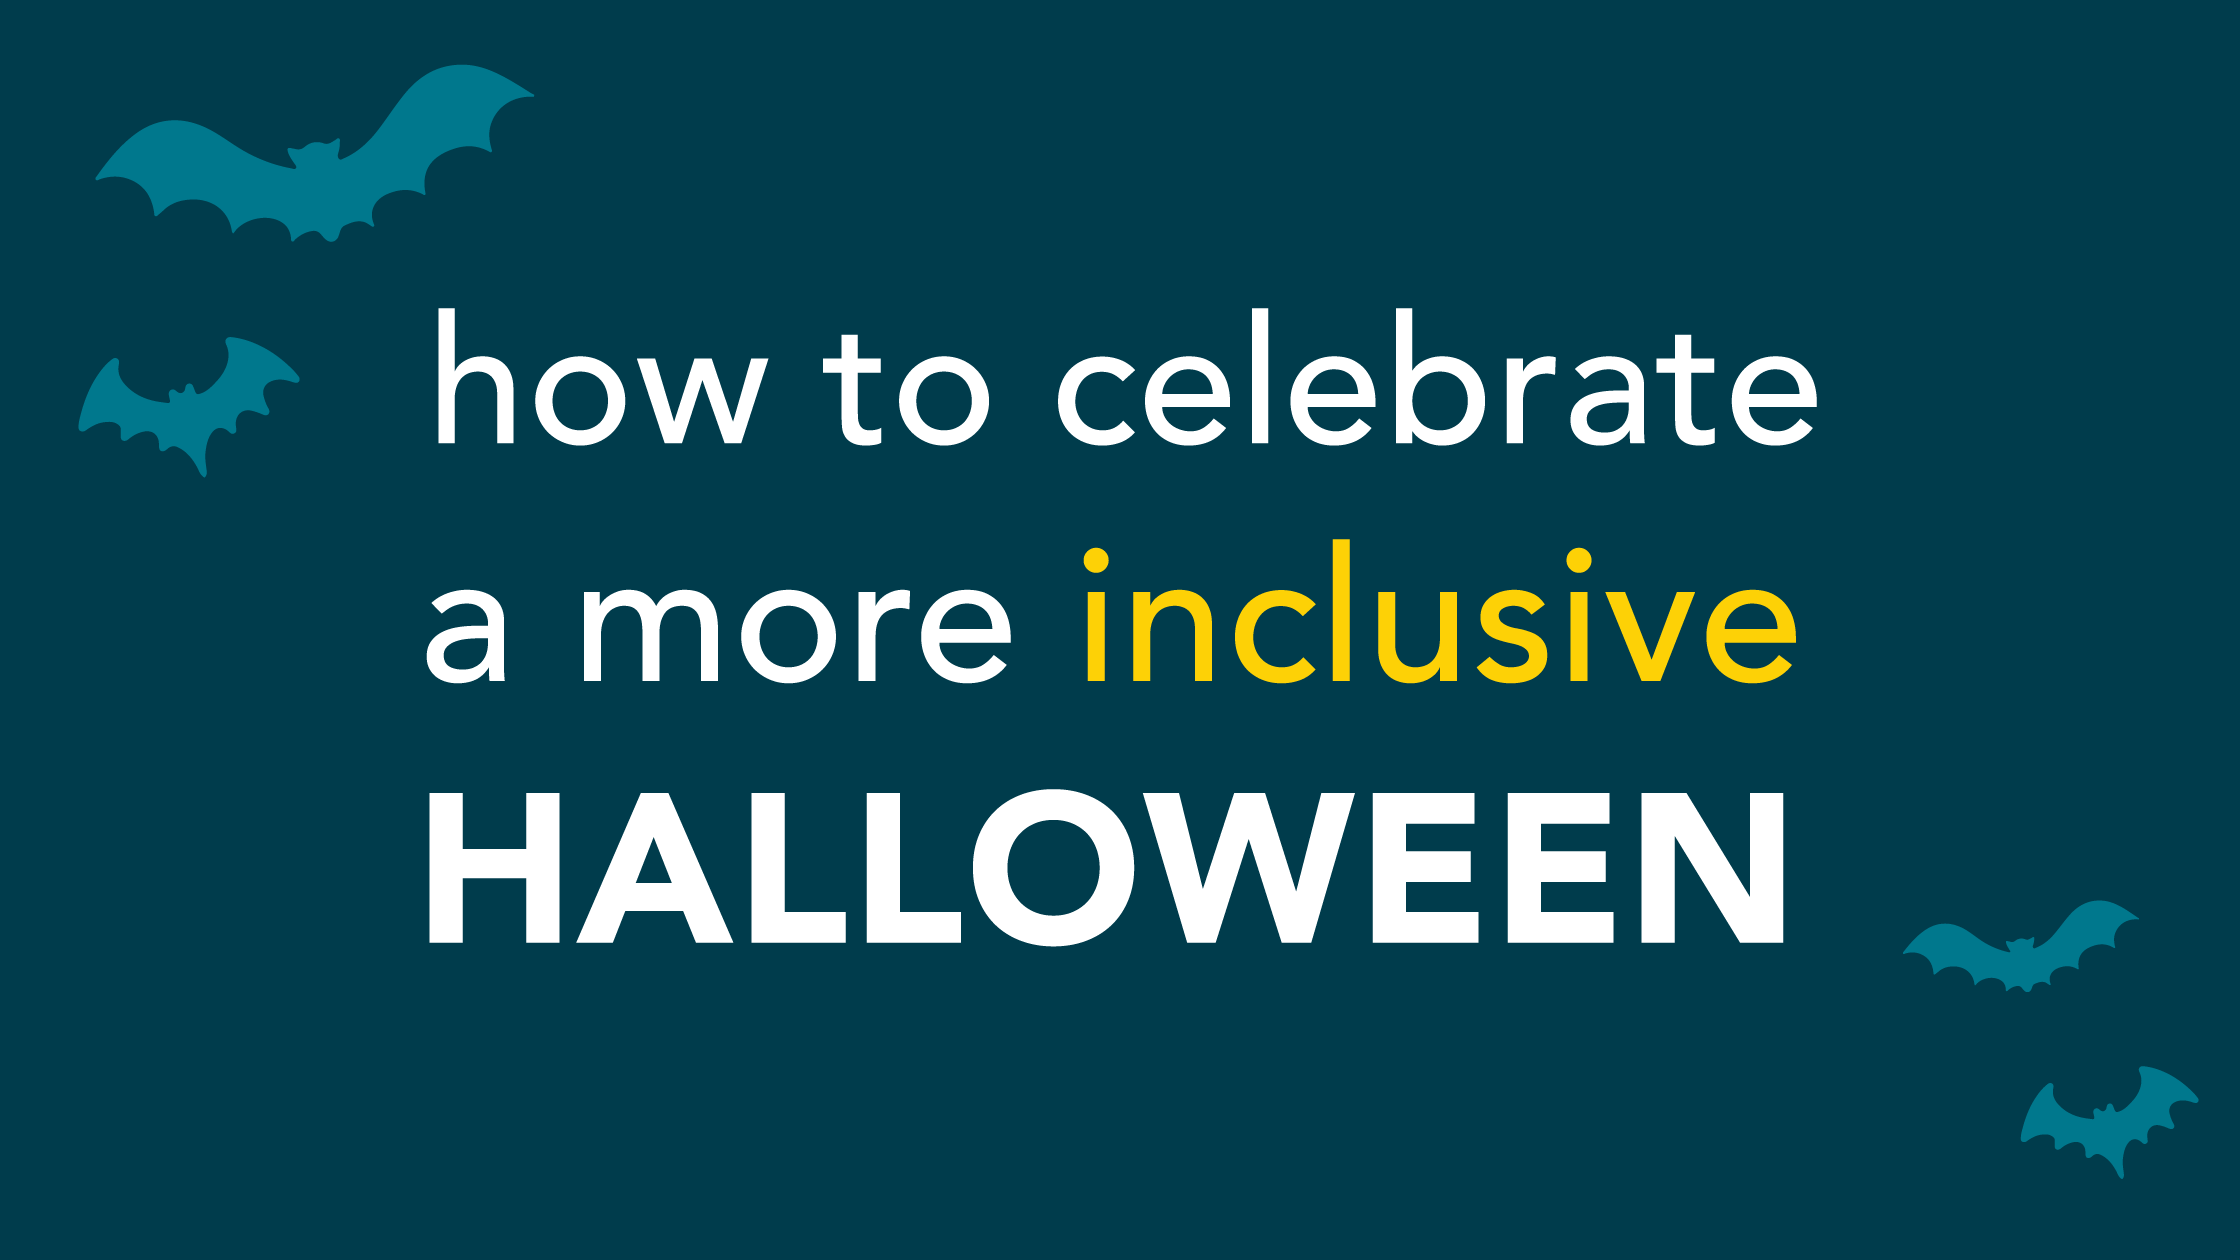 How to Celebrate a More Inclusive Halloween